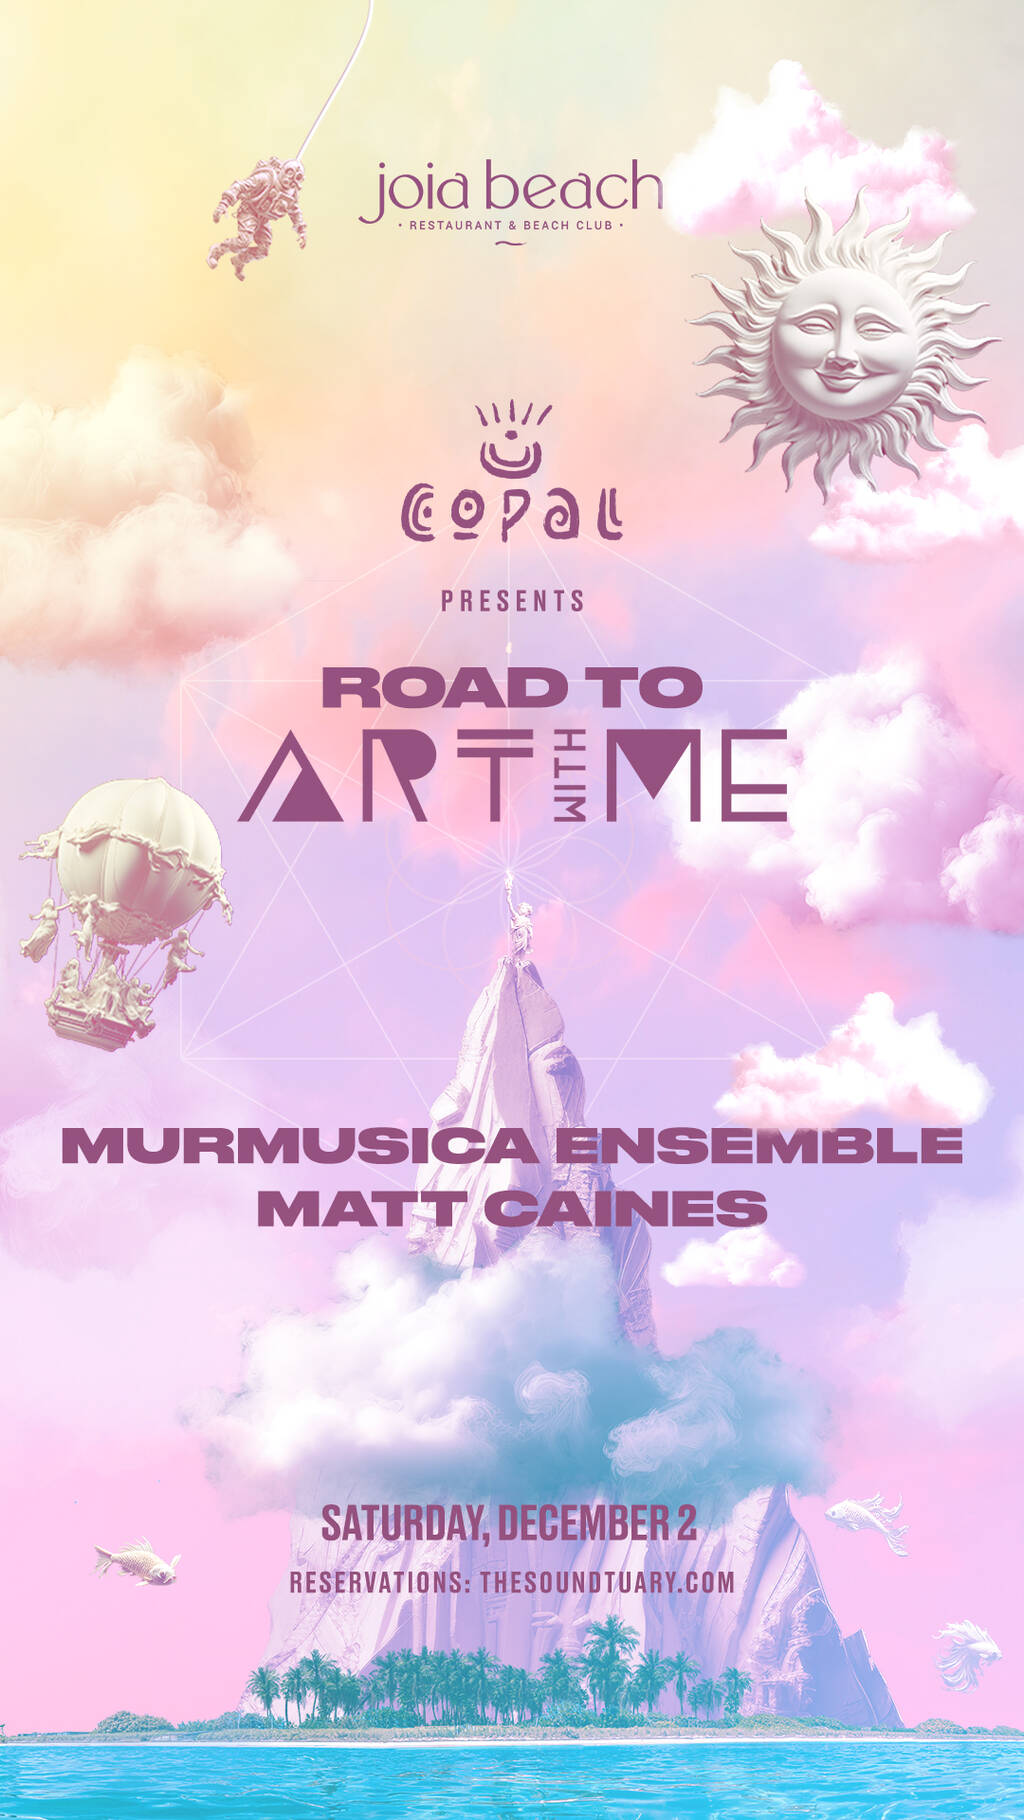 ✦ COPAL presents ROAD TO ART WITH ME ✦